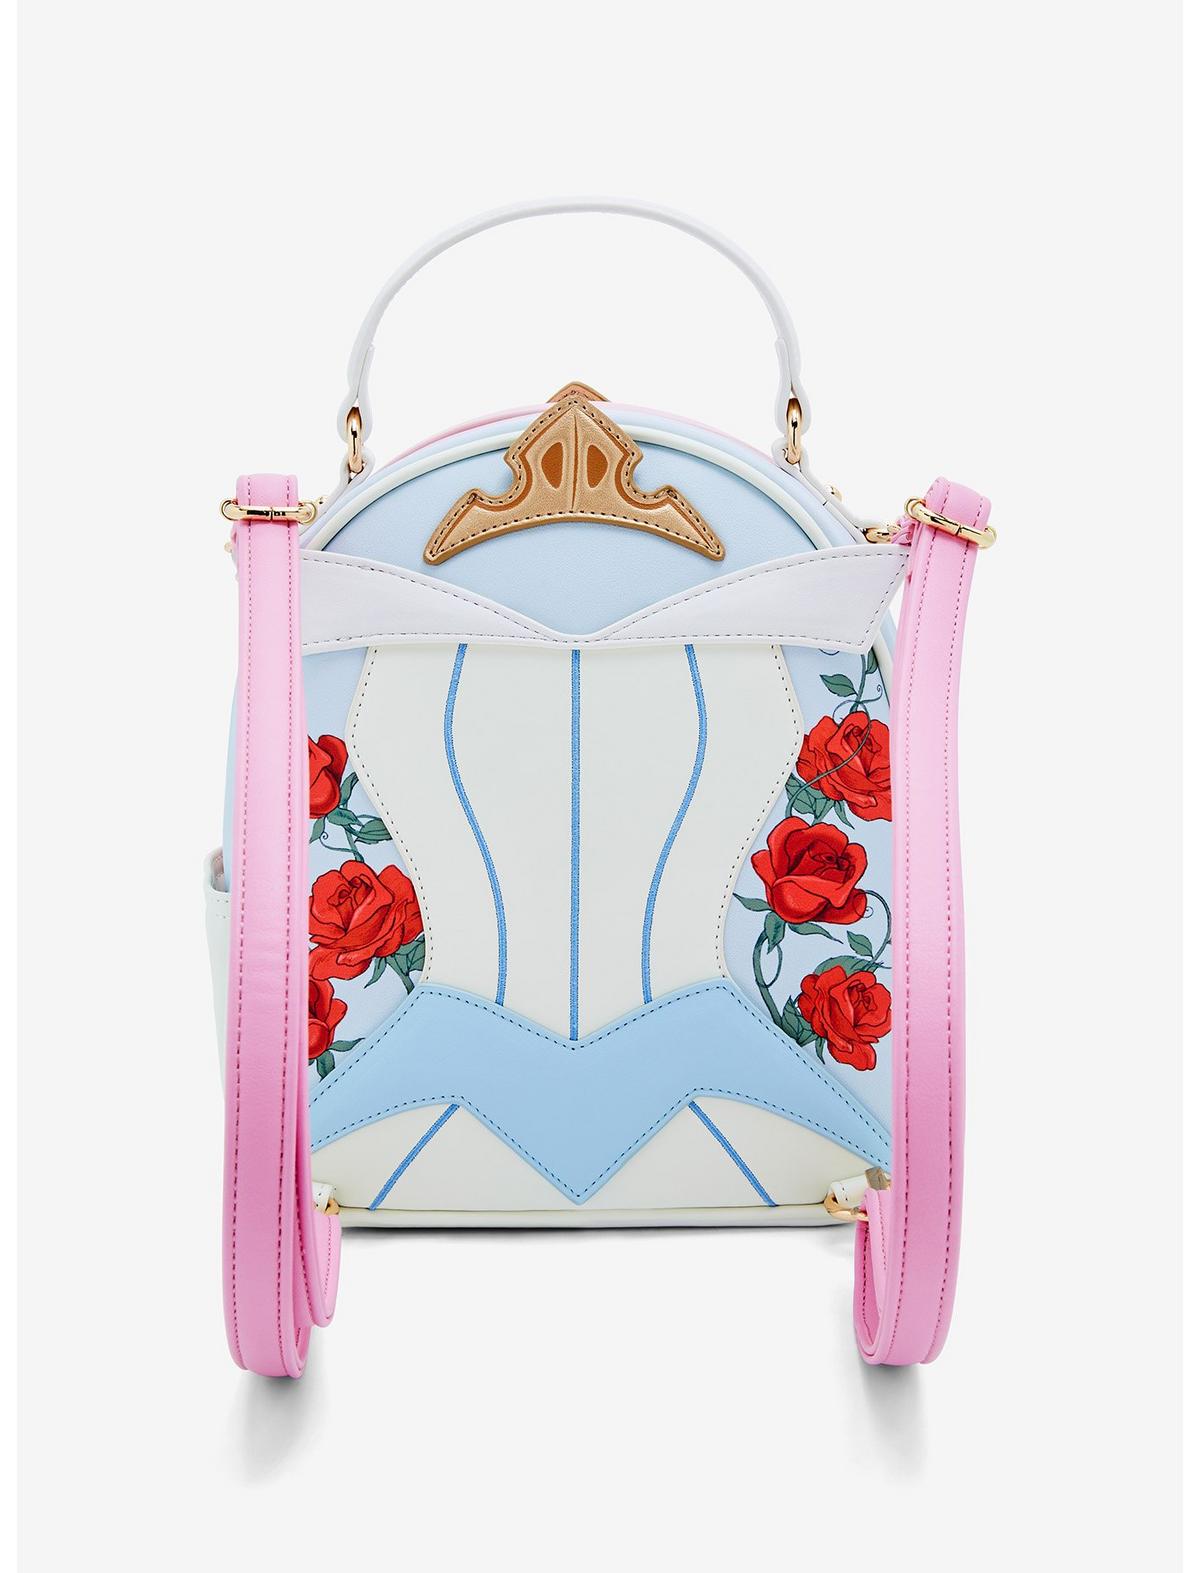 https://allears.net/wp-content/uploads/2023/03/2023-boxlunch-her-universe-sleeping-beauty-dress-color-changing-mini-backpack-loungefly.jpeg